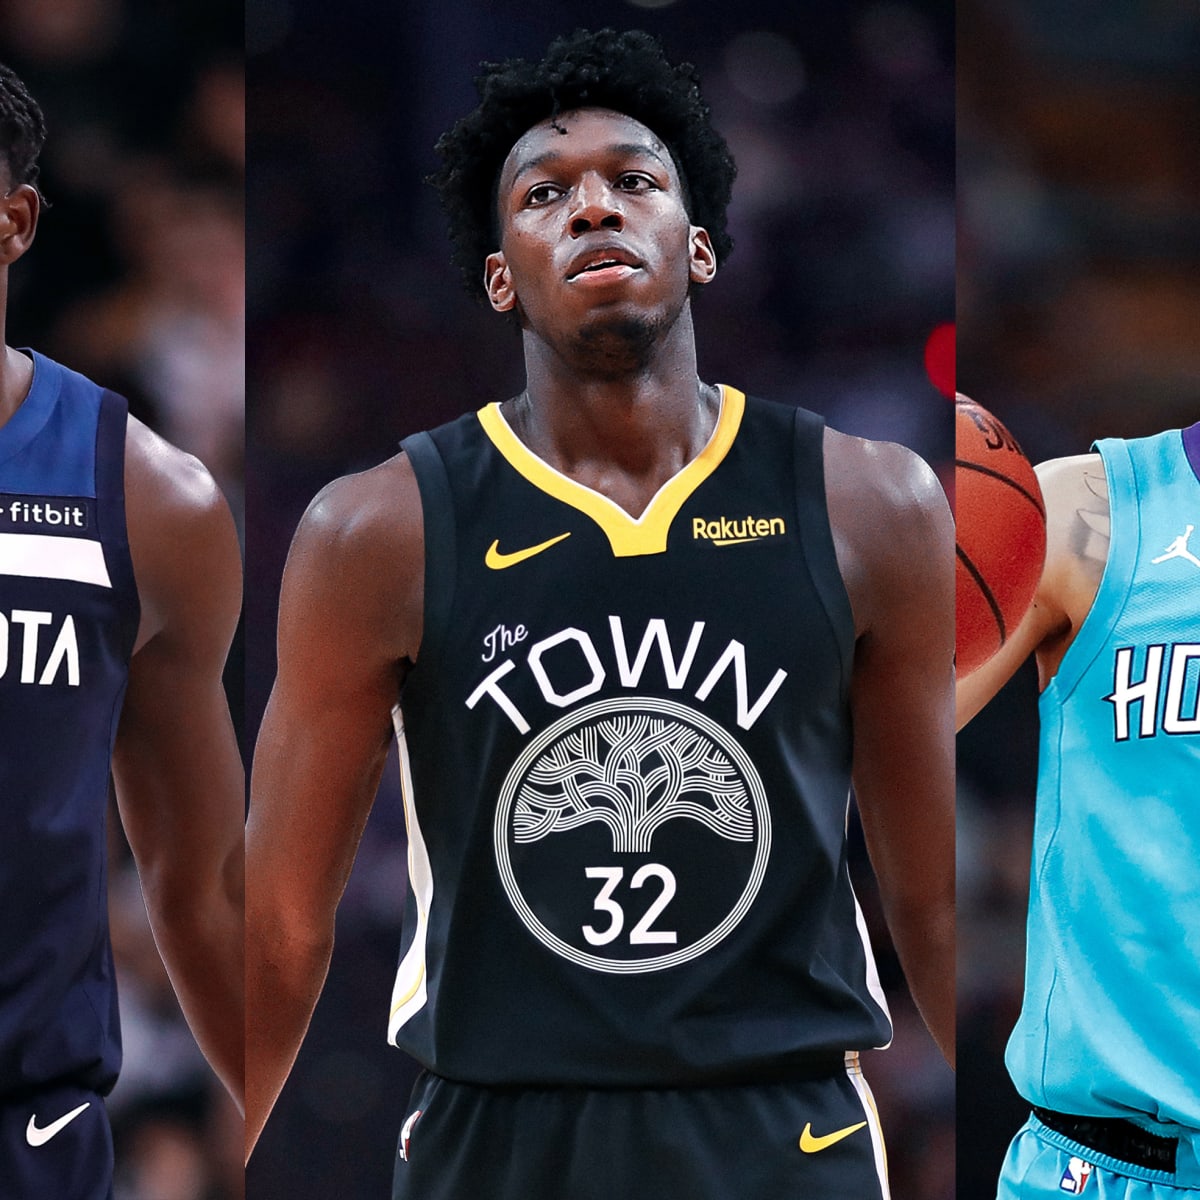 Anthony Edwards City Edition Timberwolves jerseys sell out immediately -  Sports Illustrated Minnesota Sports, News, Analysis, and More